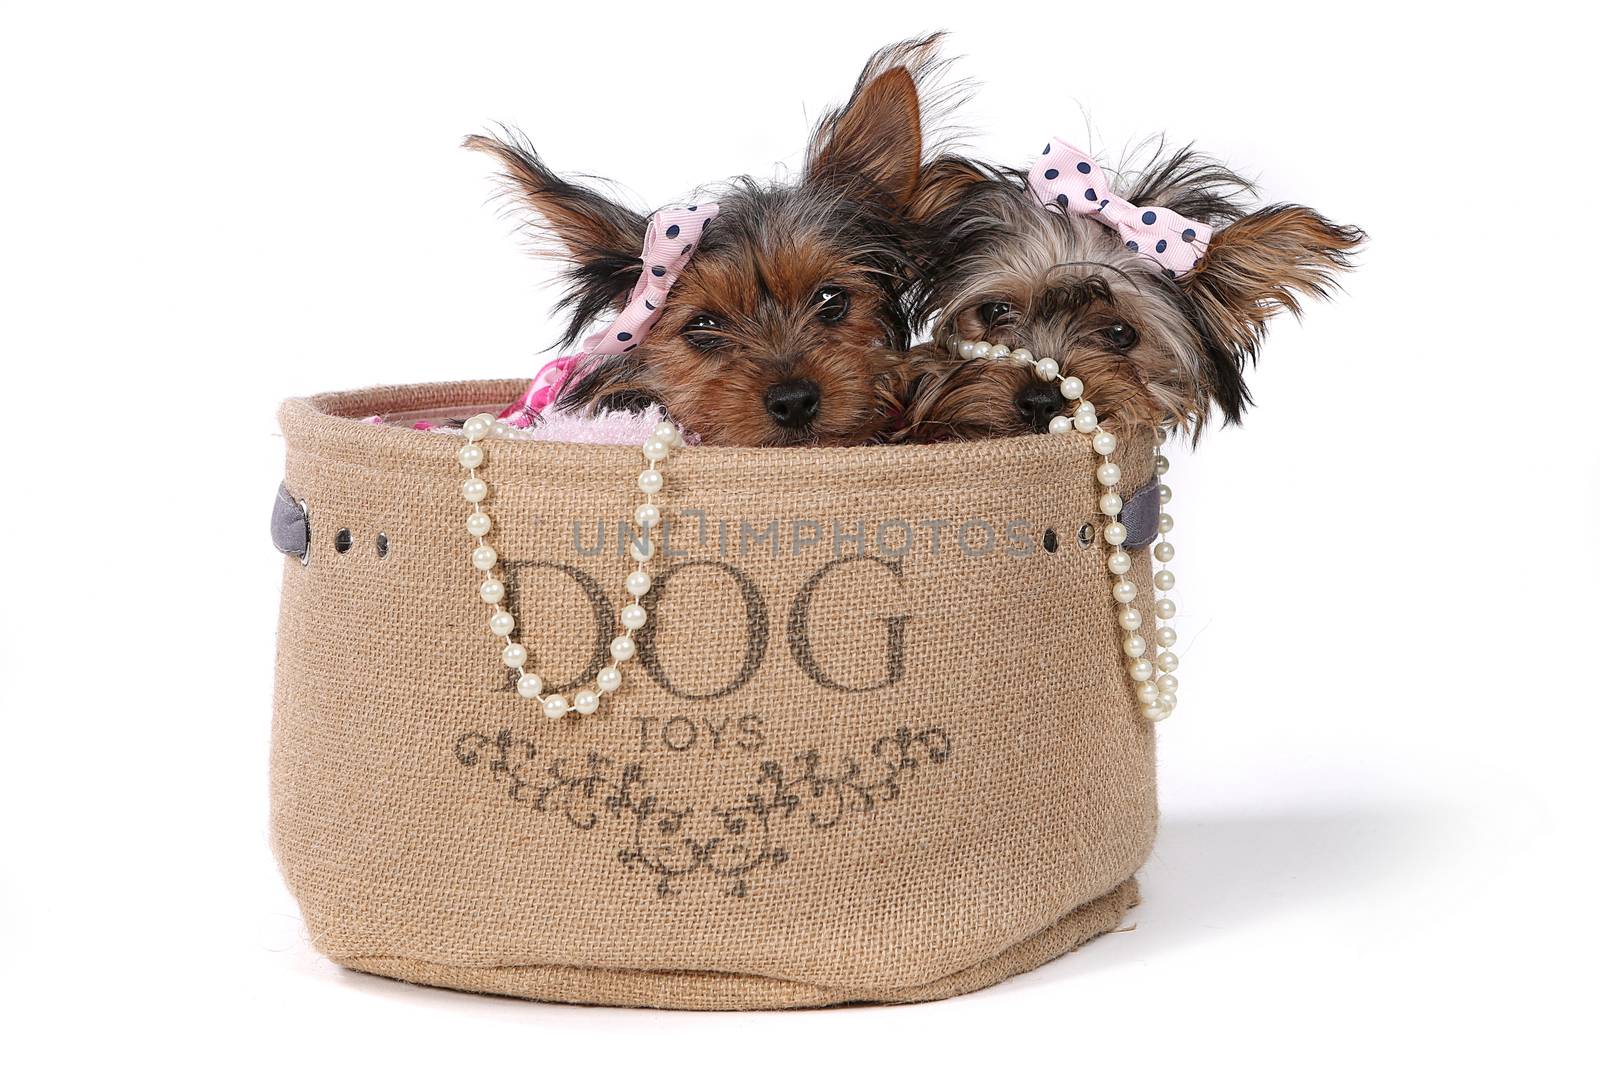 Yorkshire Terrier Puppies Dressed up in Pink by tobkatrina